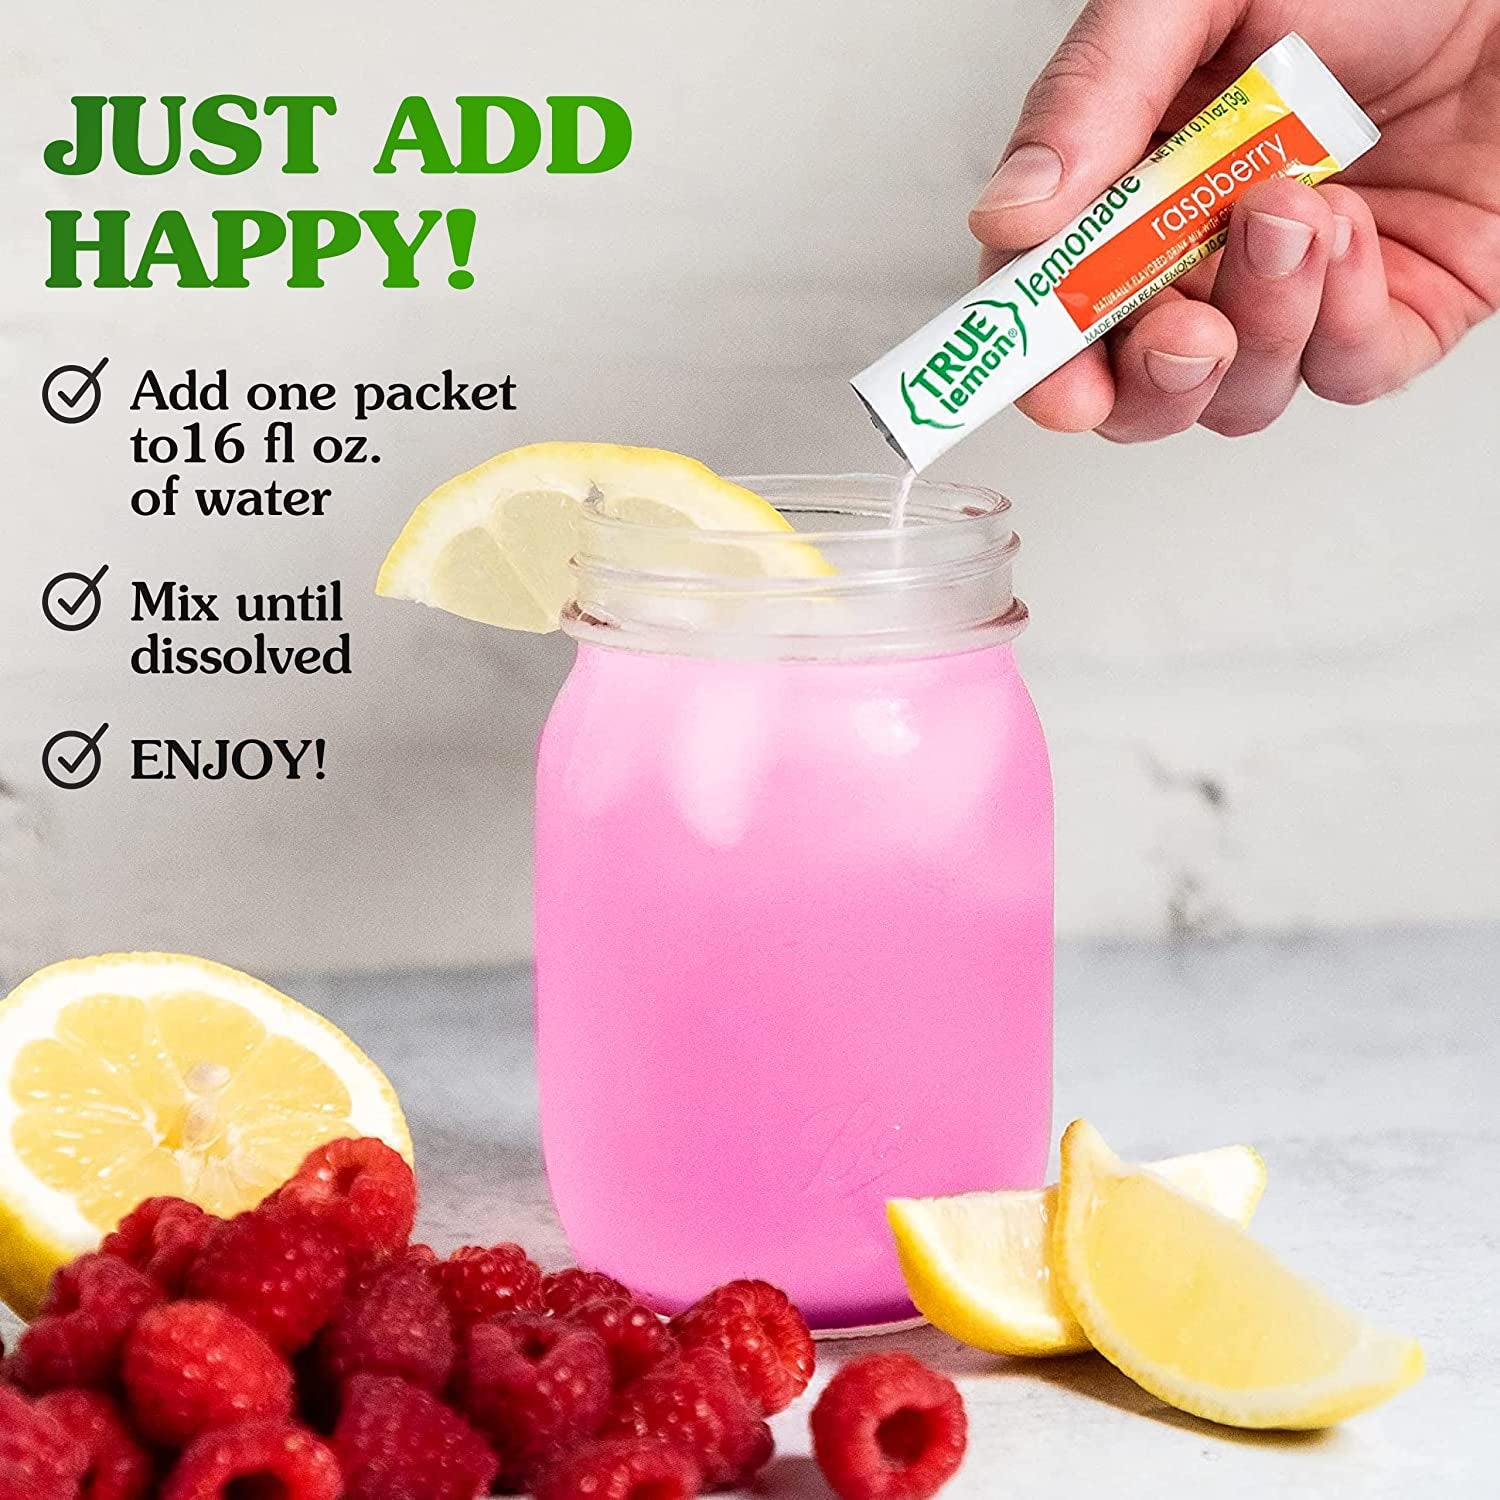 TRUE LEMON Raspberry Lemonade Drink Mix (30 Packets) Made from Real Lemon No Preservatives, No Artificial Sweeteners, Gluten Free Water Flavor Packets & Water Enhancer with Stevia, 3.17 Oz(Pack of 30)